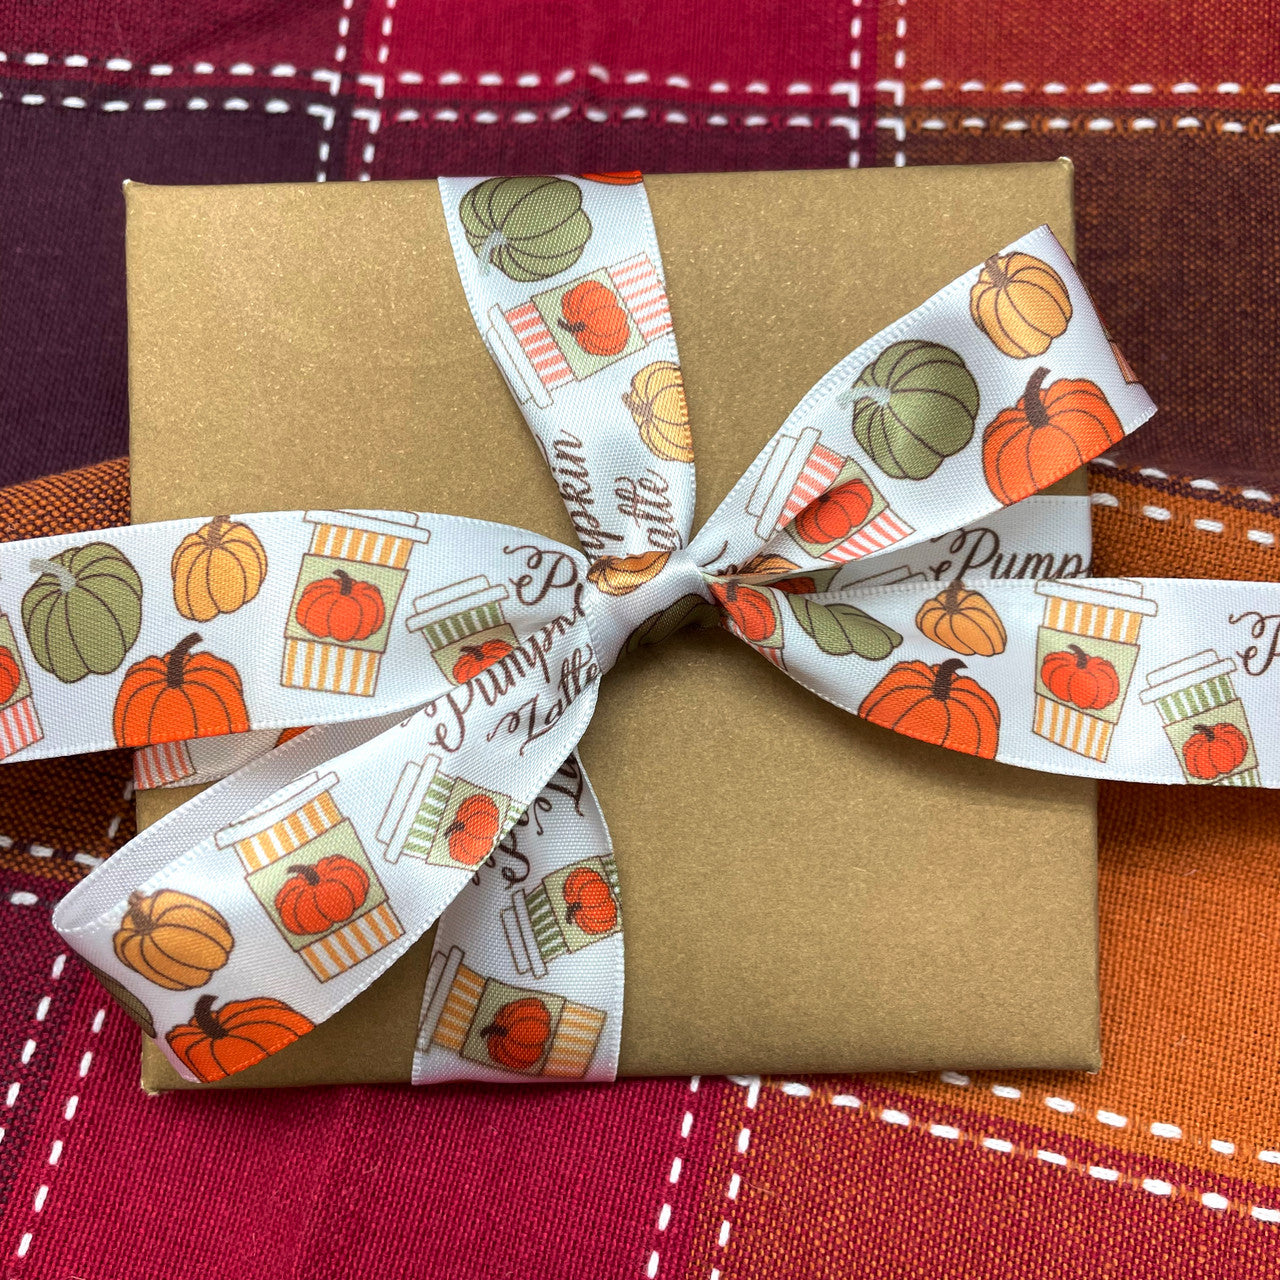 Tie a coffee gift with our Pumpkin Latte ribbon for the everything pumpkin spice person in your life!